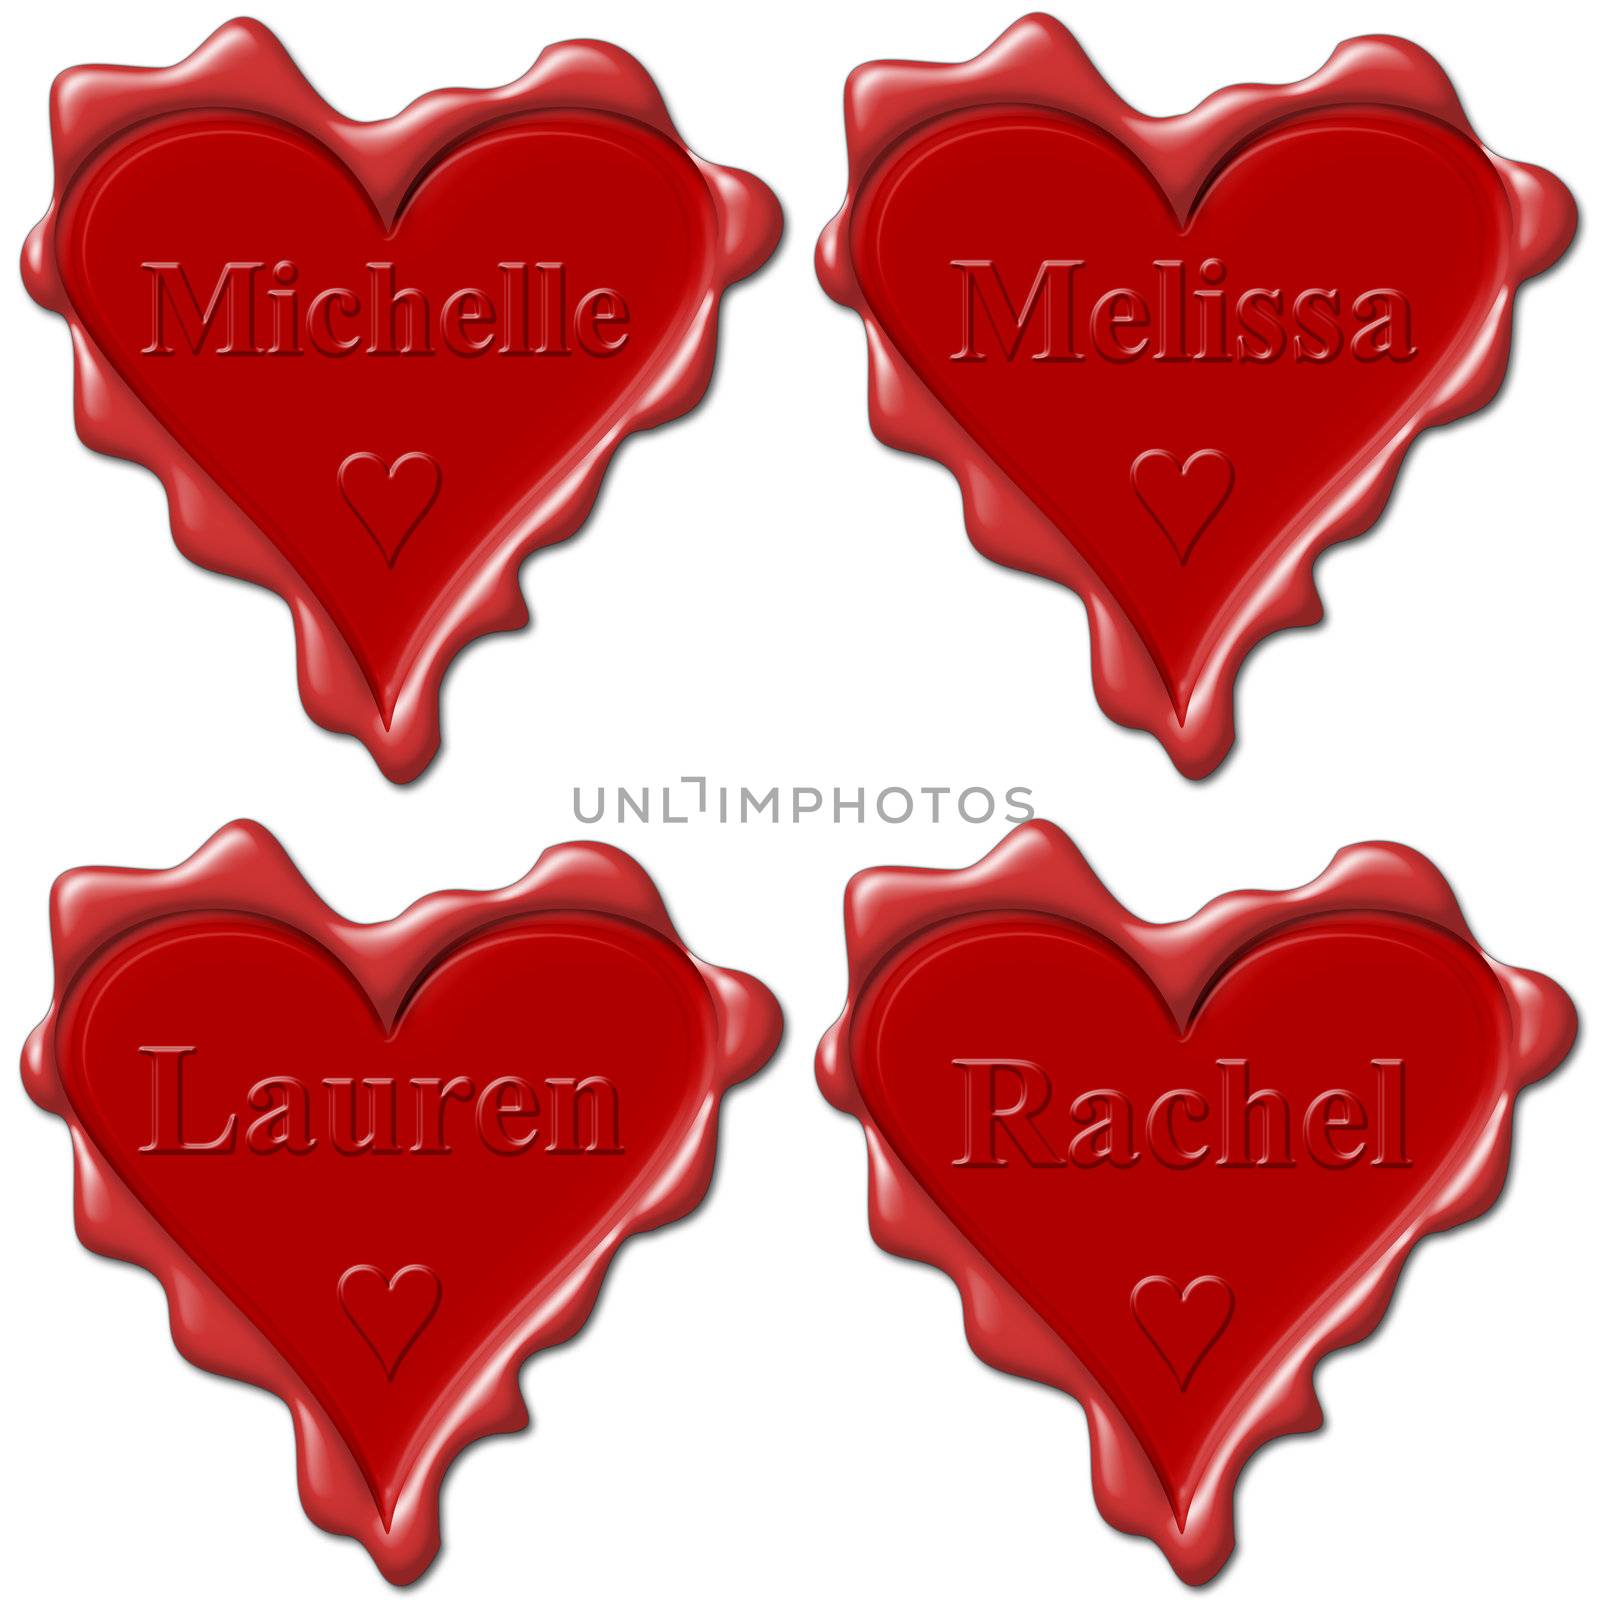 Valentine love hearts with names: Michelle, Melissa, Lauren, Rac by mozzyb